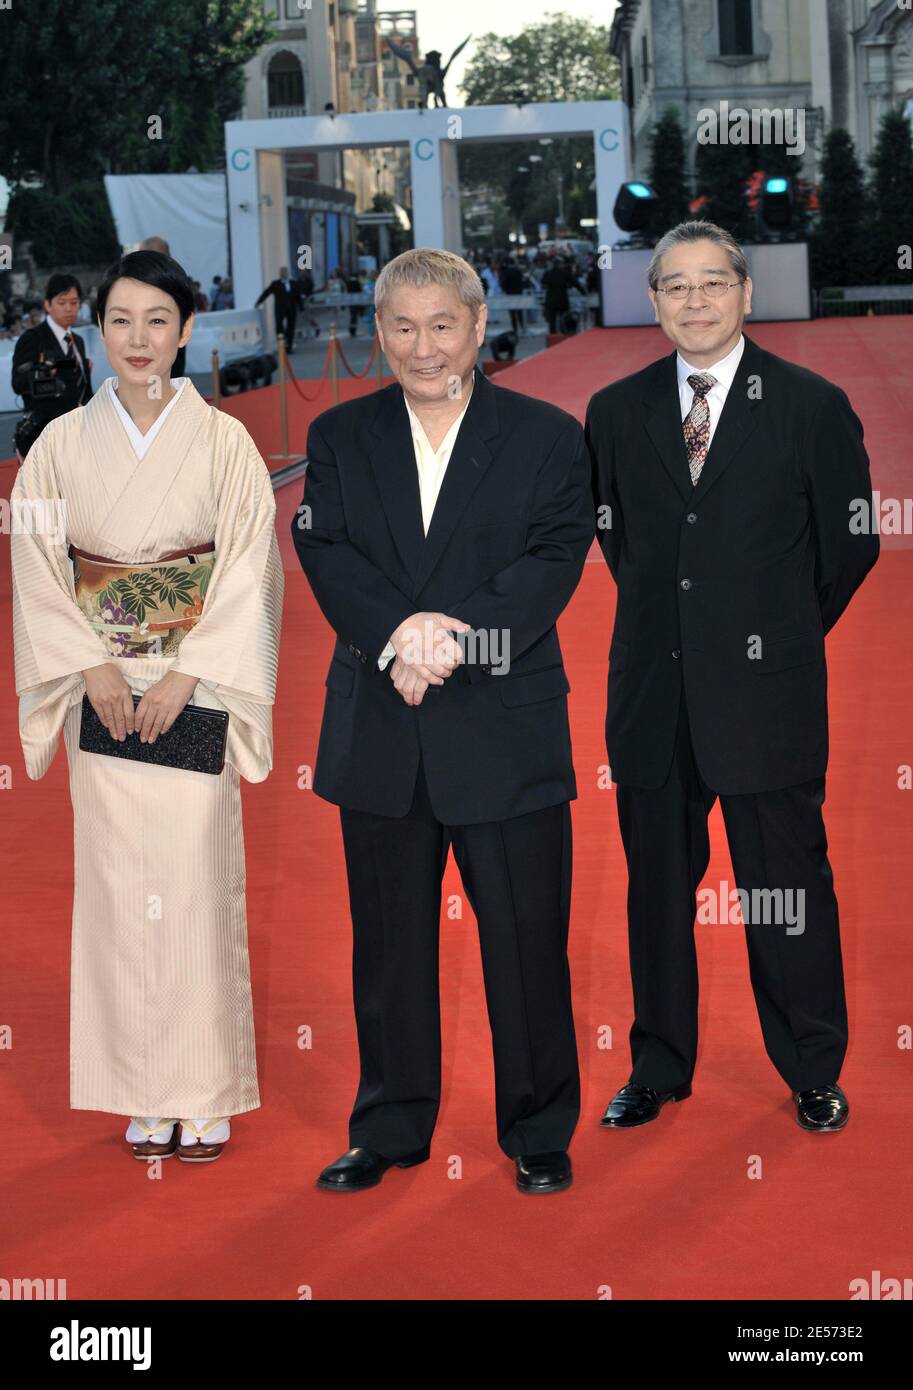 Actress Kanako Higuchi, director Takeshi Kitano and producer Masayuki Mori arrive at the 'Achilles and the Tortoise' screening during the 65th Mostra Venice Film Festival at Sala Grande in Venice, Italy on August 28, 2008. Photo by Thierry Orban/ABACAPRESS.COM Stock Photo